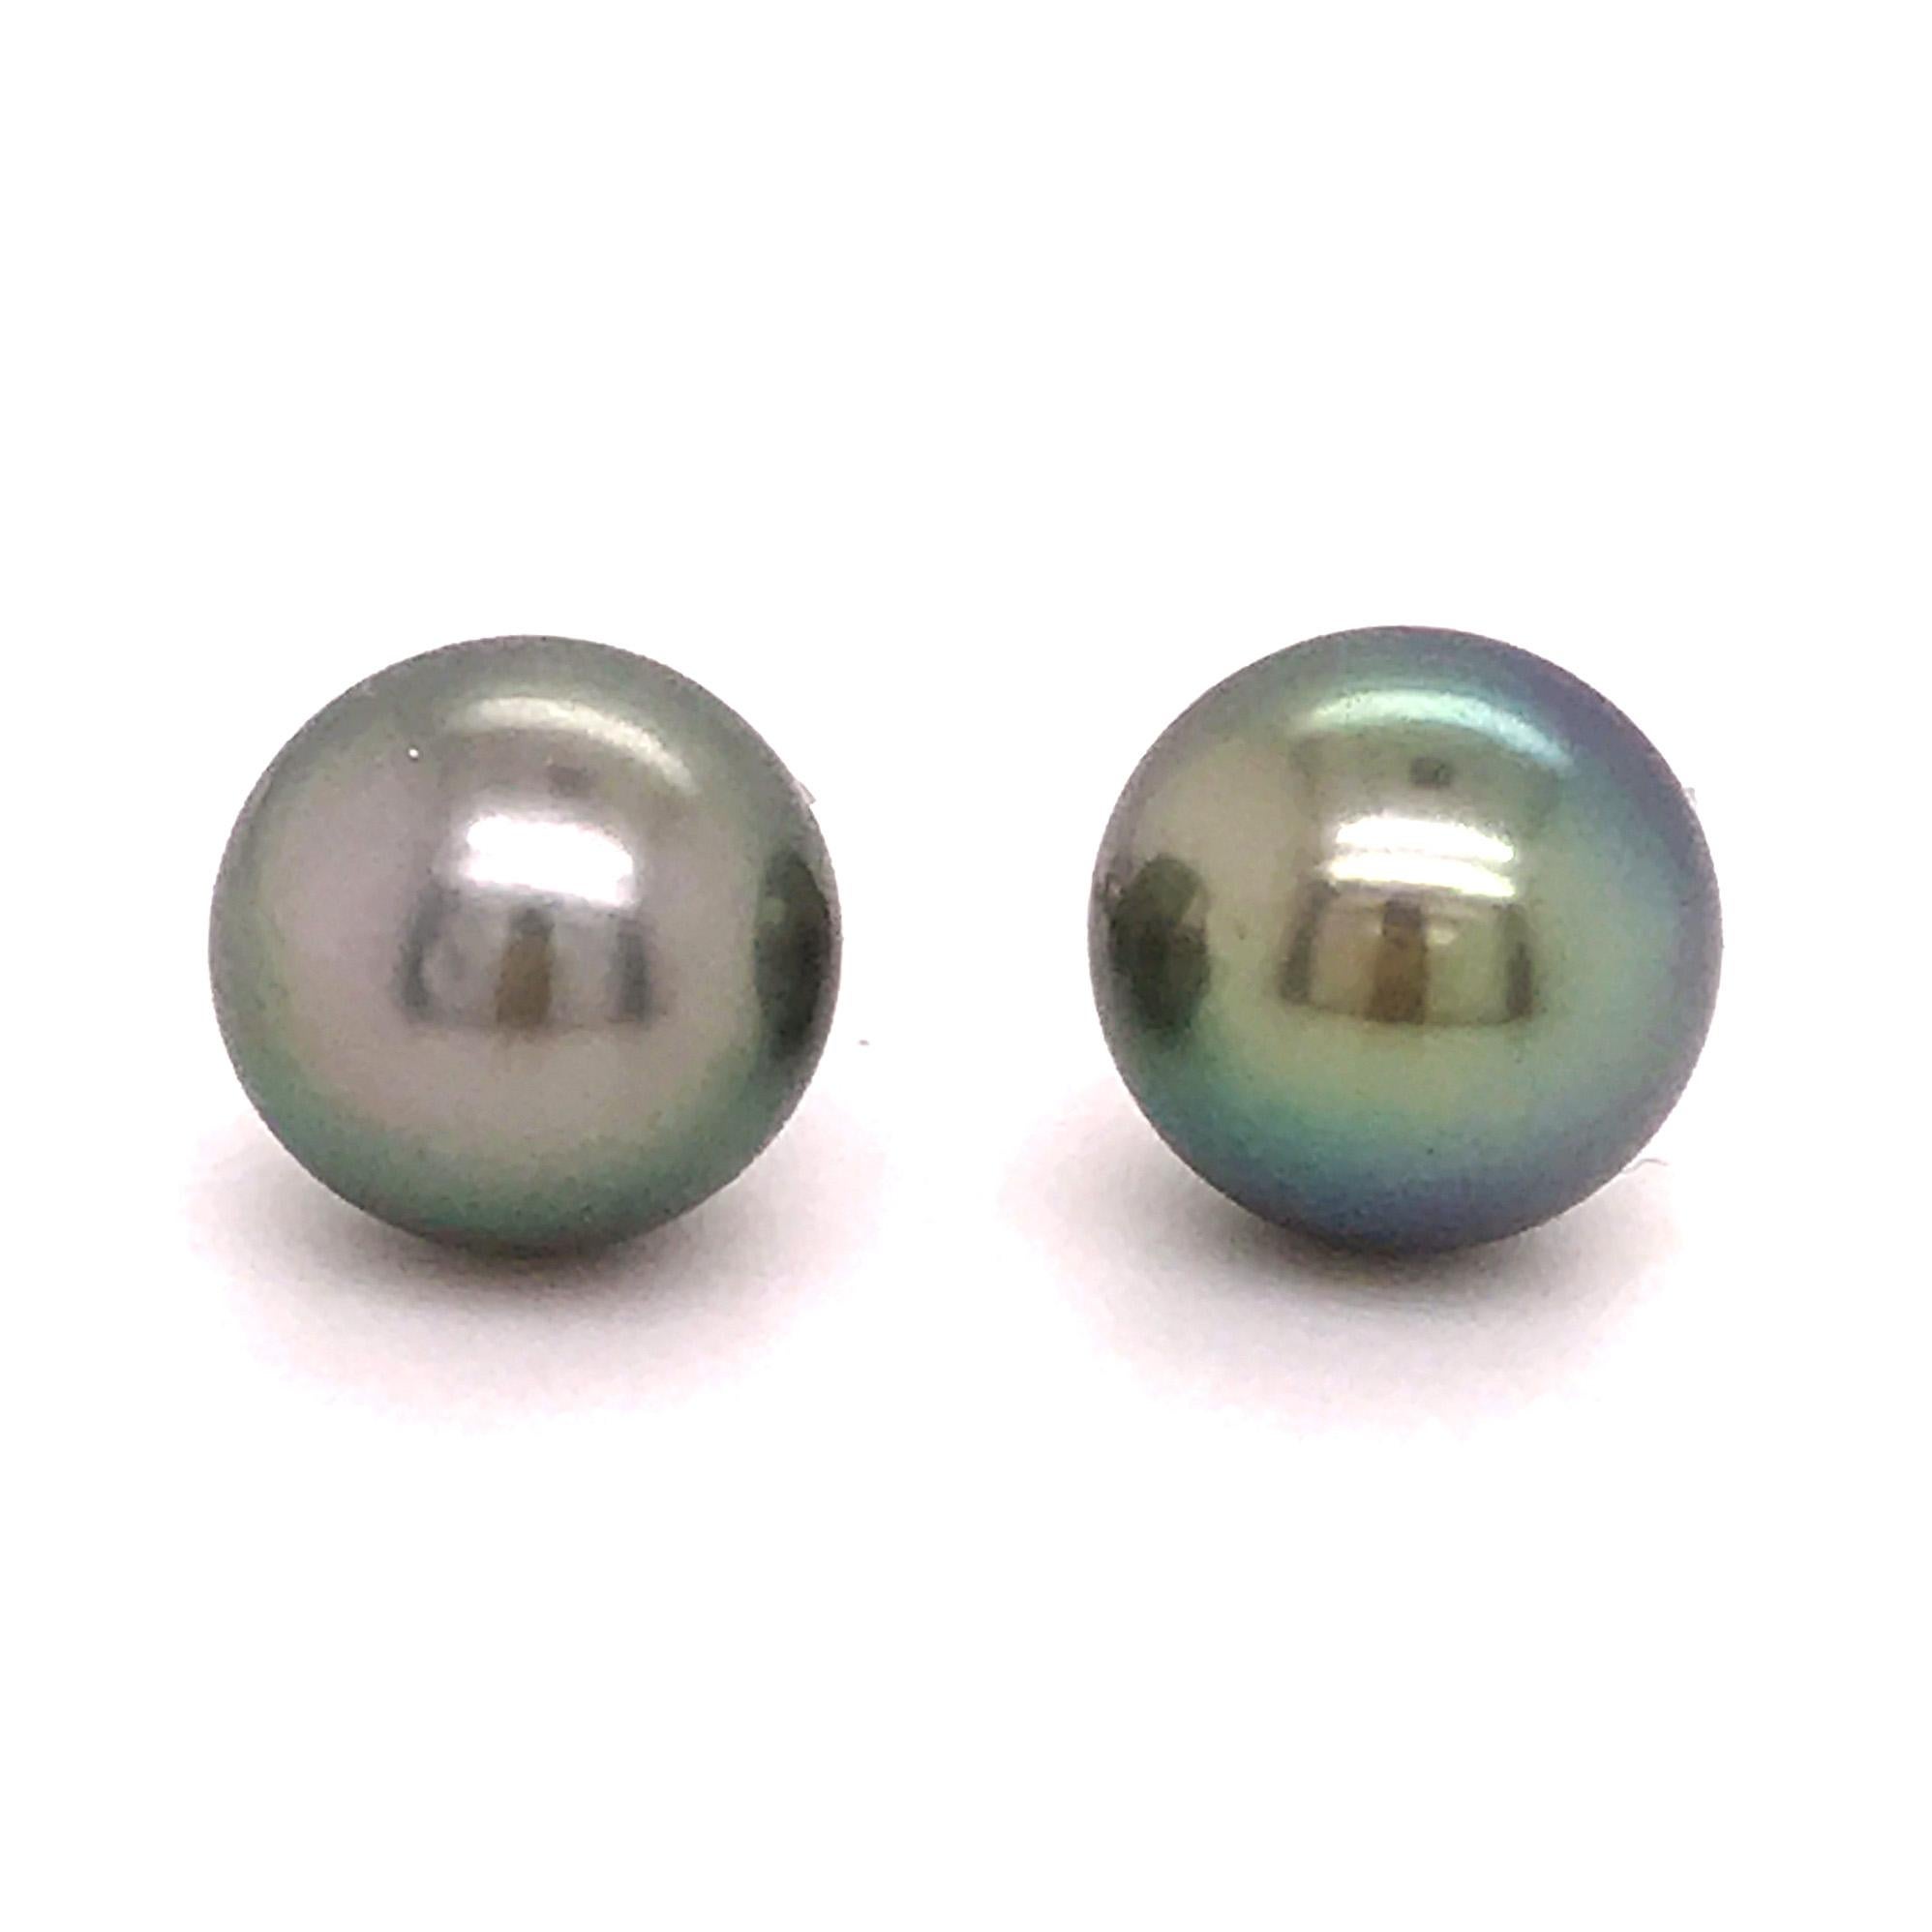 These genuine Tahitian pearl studs are edge, funky and sassy! How amazing would these look on you at a girls brunch or night out? Pearls are a staple in the fine jewelry world and so much fun to wear! Pearls are classic, elegant... and if they're